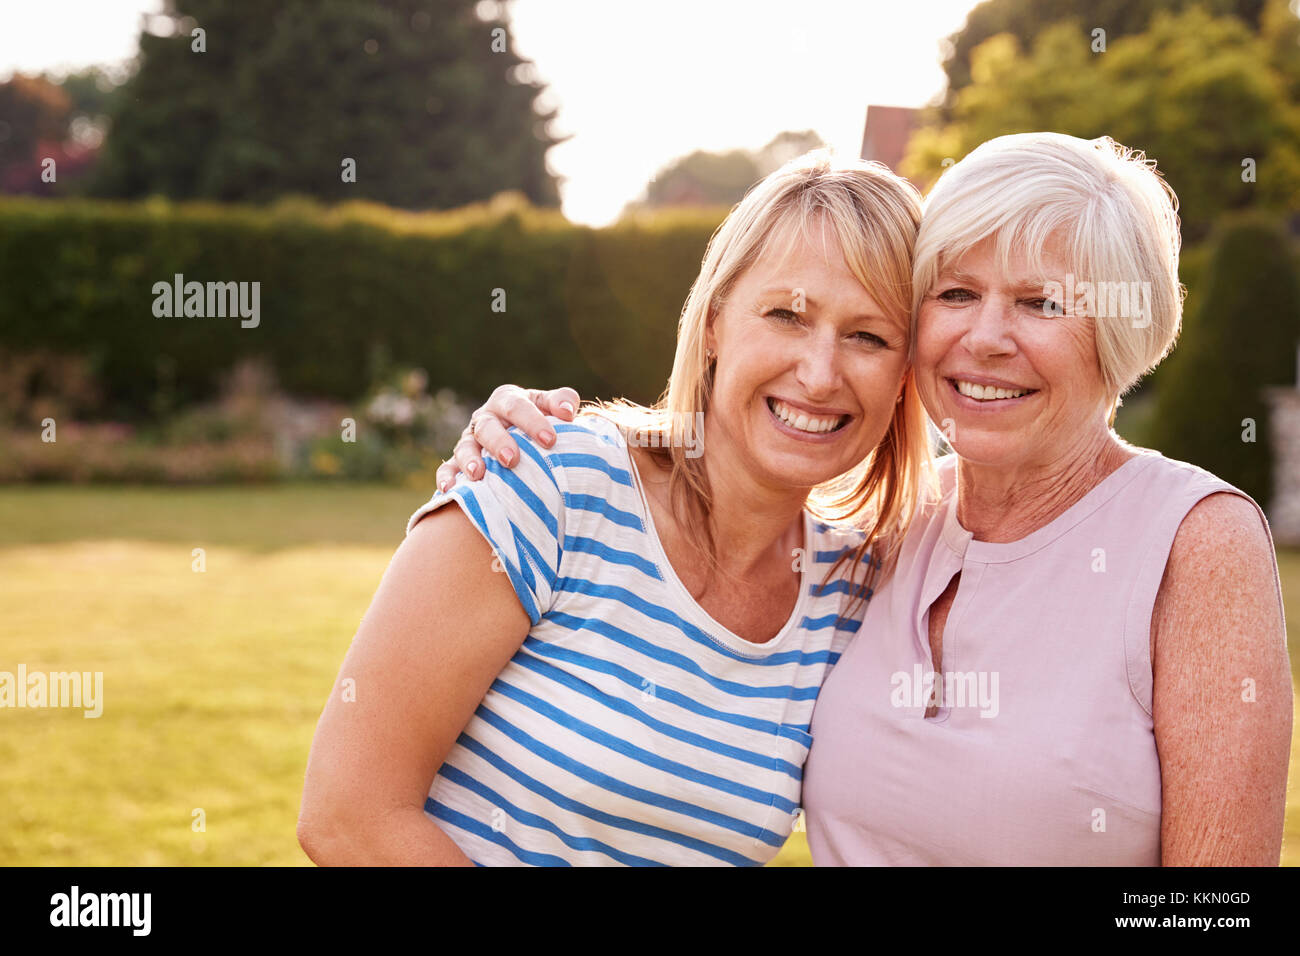 Senior woman and adult daughter embracing in garden Banque D'Images